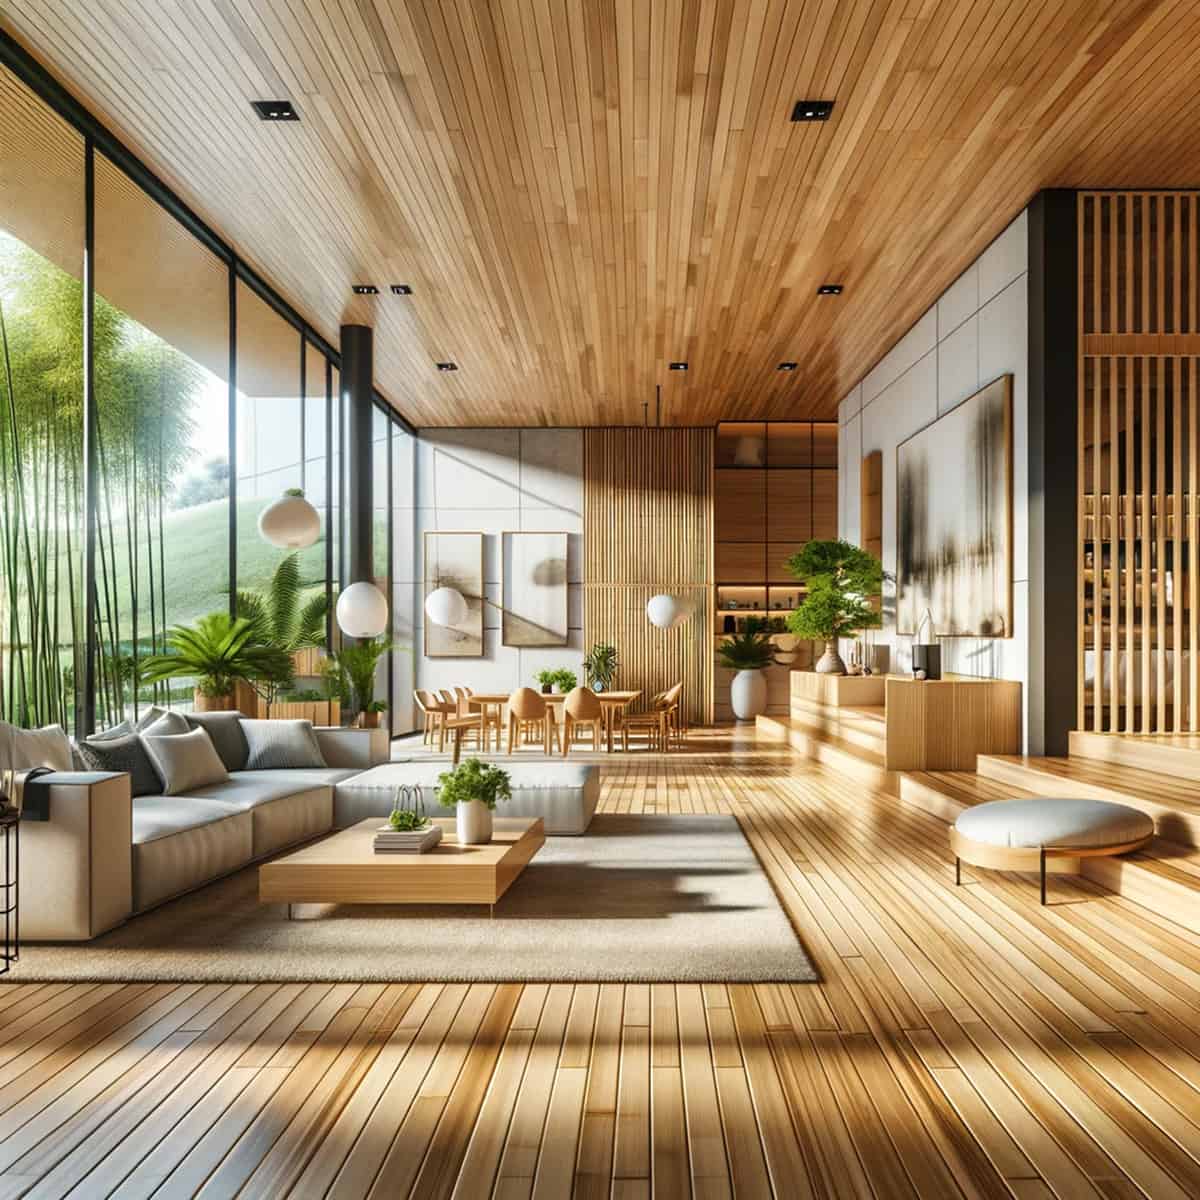 A snapshot of a modern interior defined by its minimalist decor and generous windows, which highlight the functional beauty of water-resistant bamboo flooring. The space is thoughtfully furnished with contemporary pieces that align with the bamboo's eco-friendly qualities.